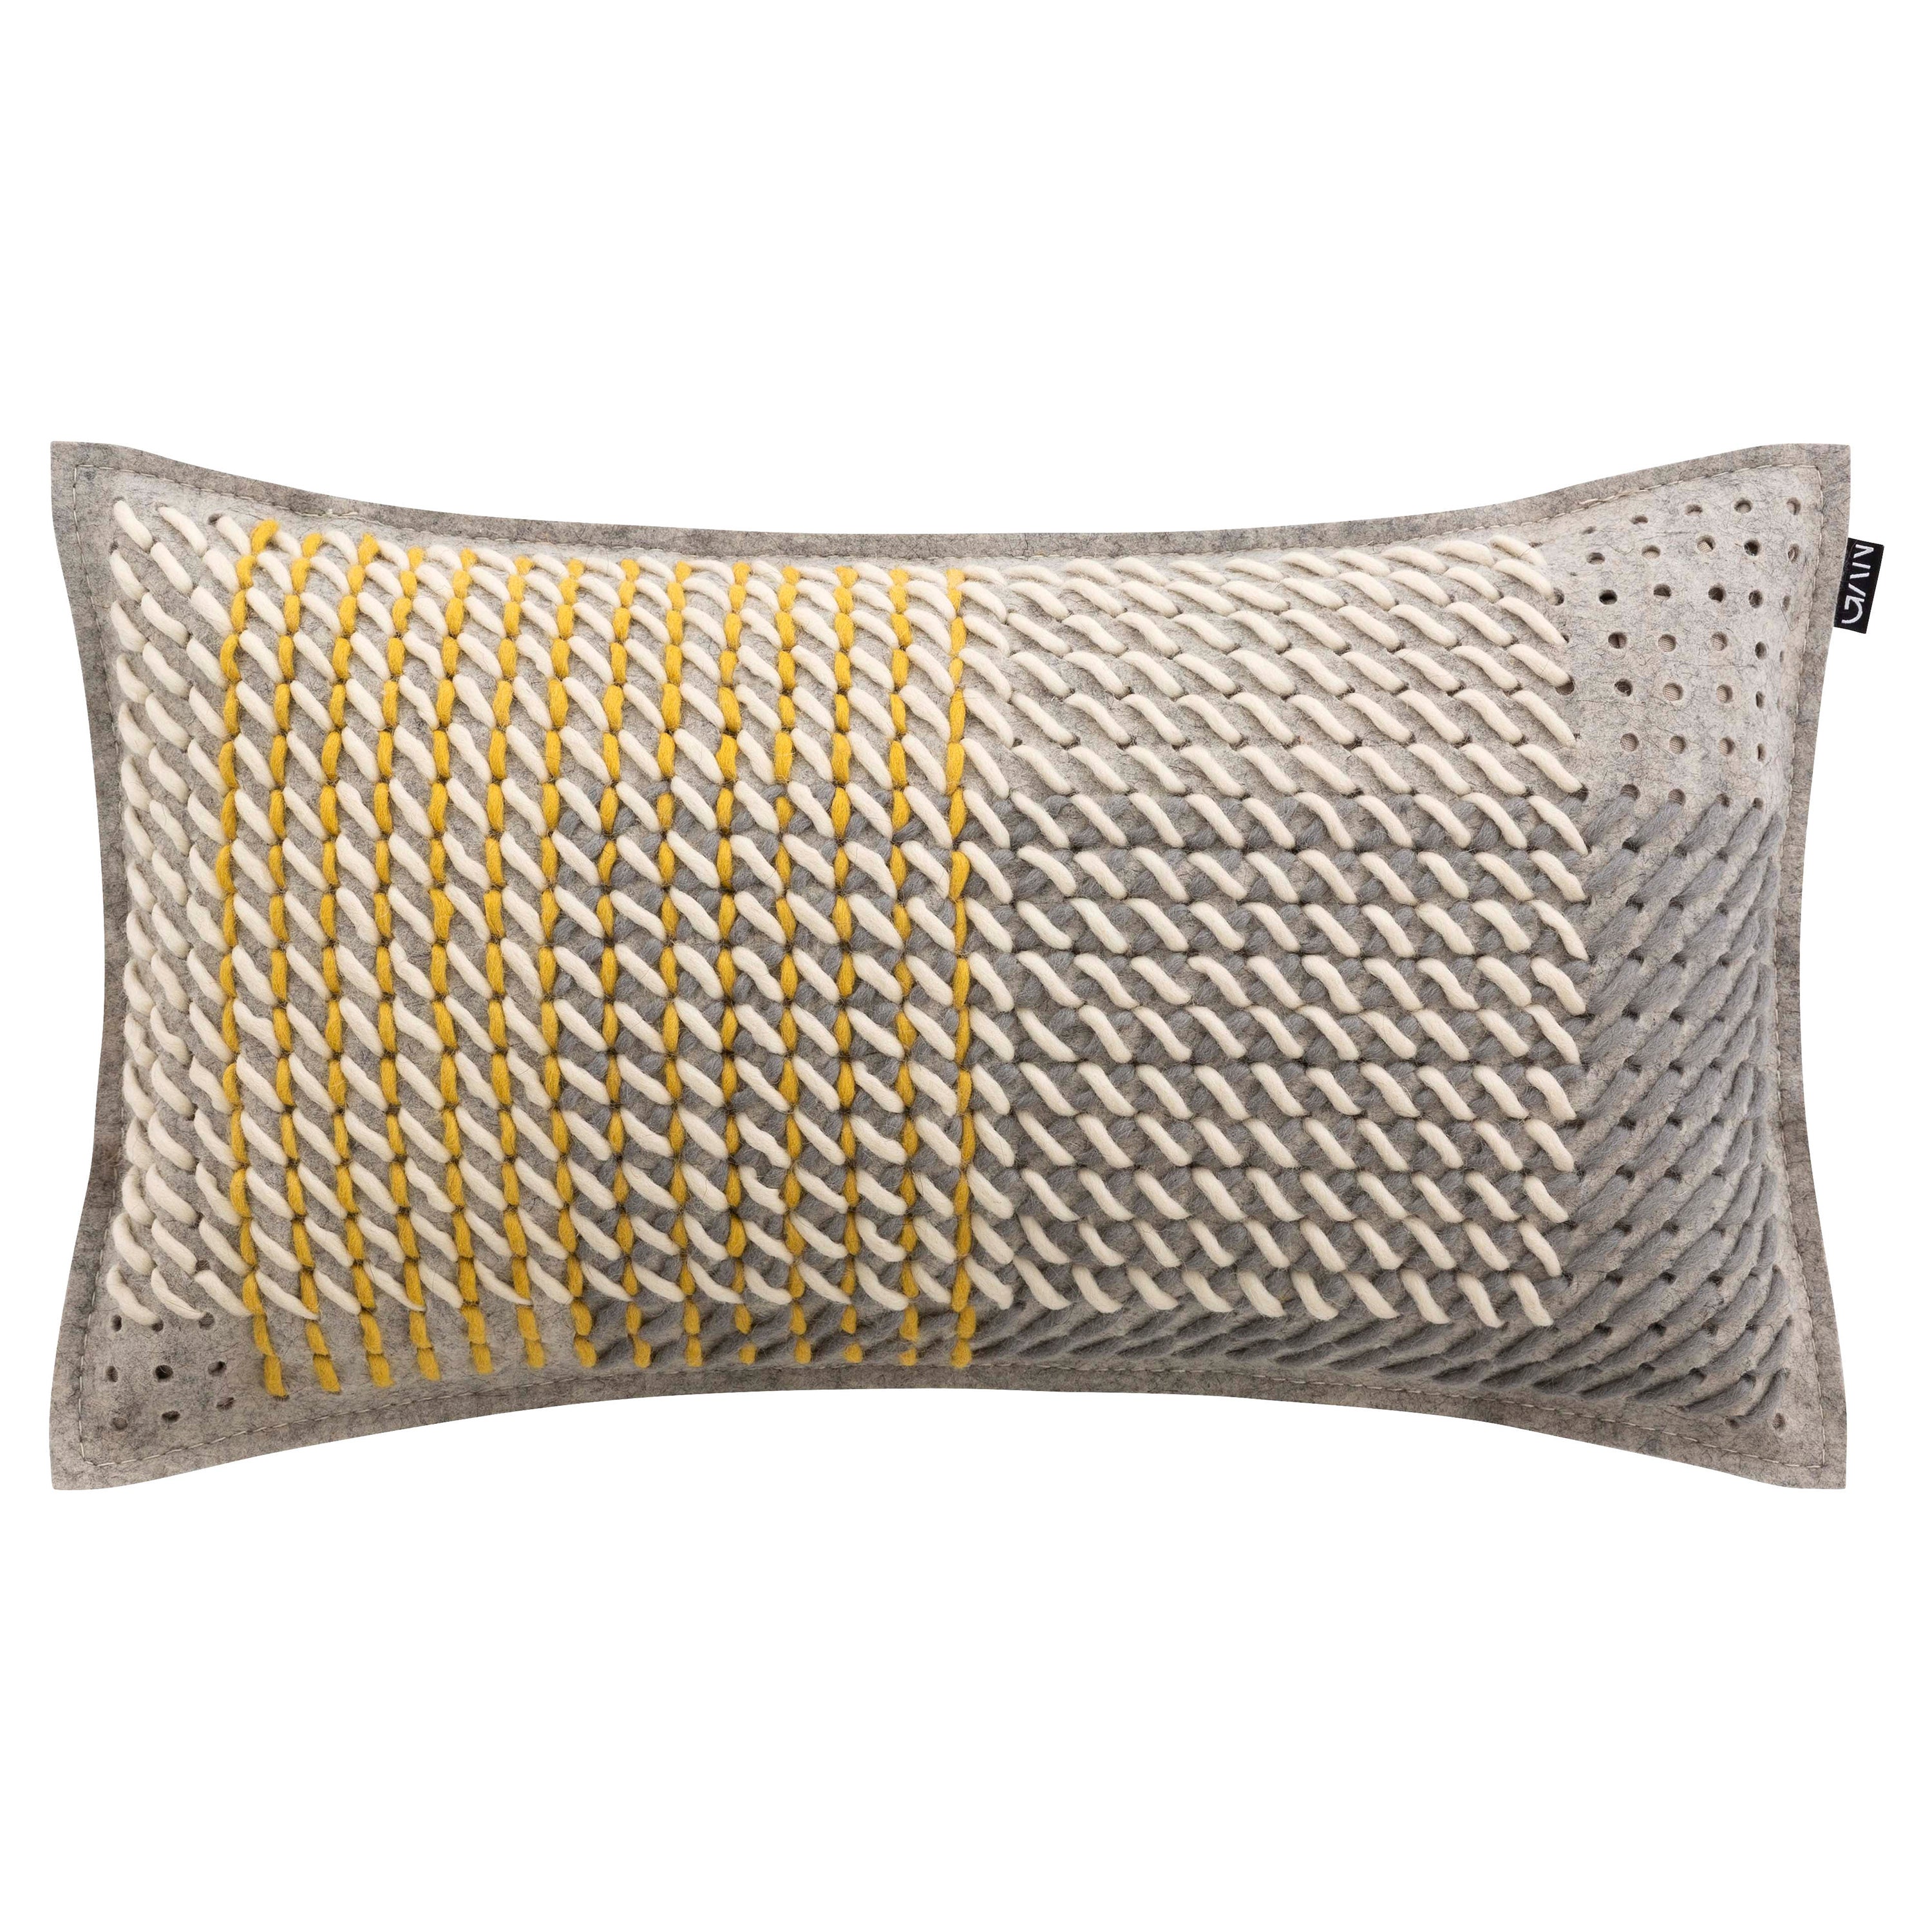 GAN Spaces Canevas Geo Large Pillow in Grey by Charlotte Lancelot For Sale